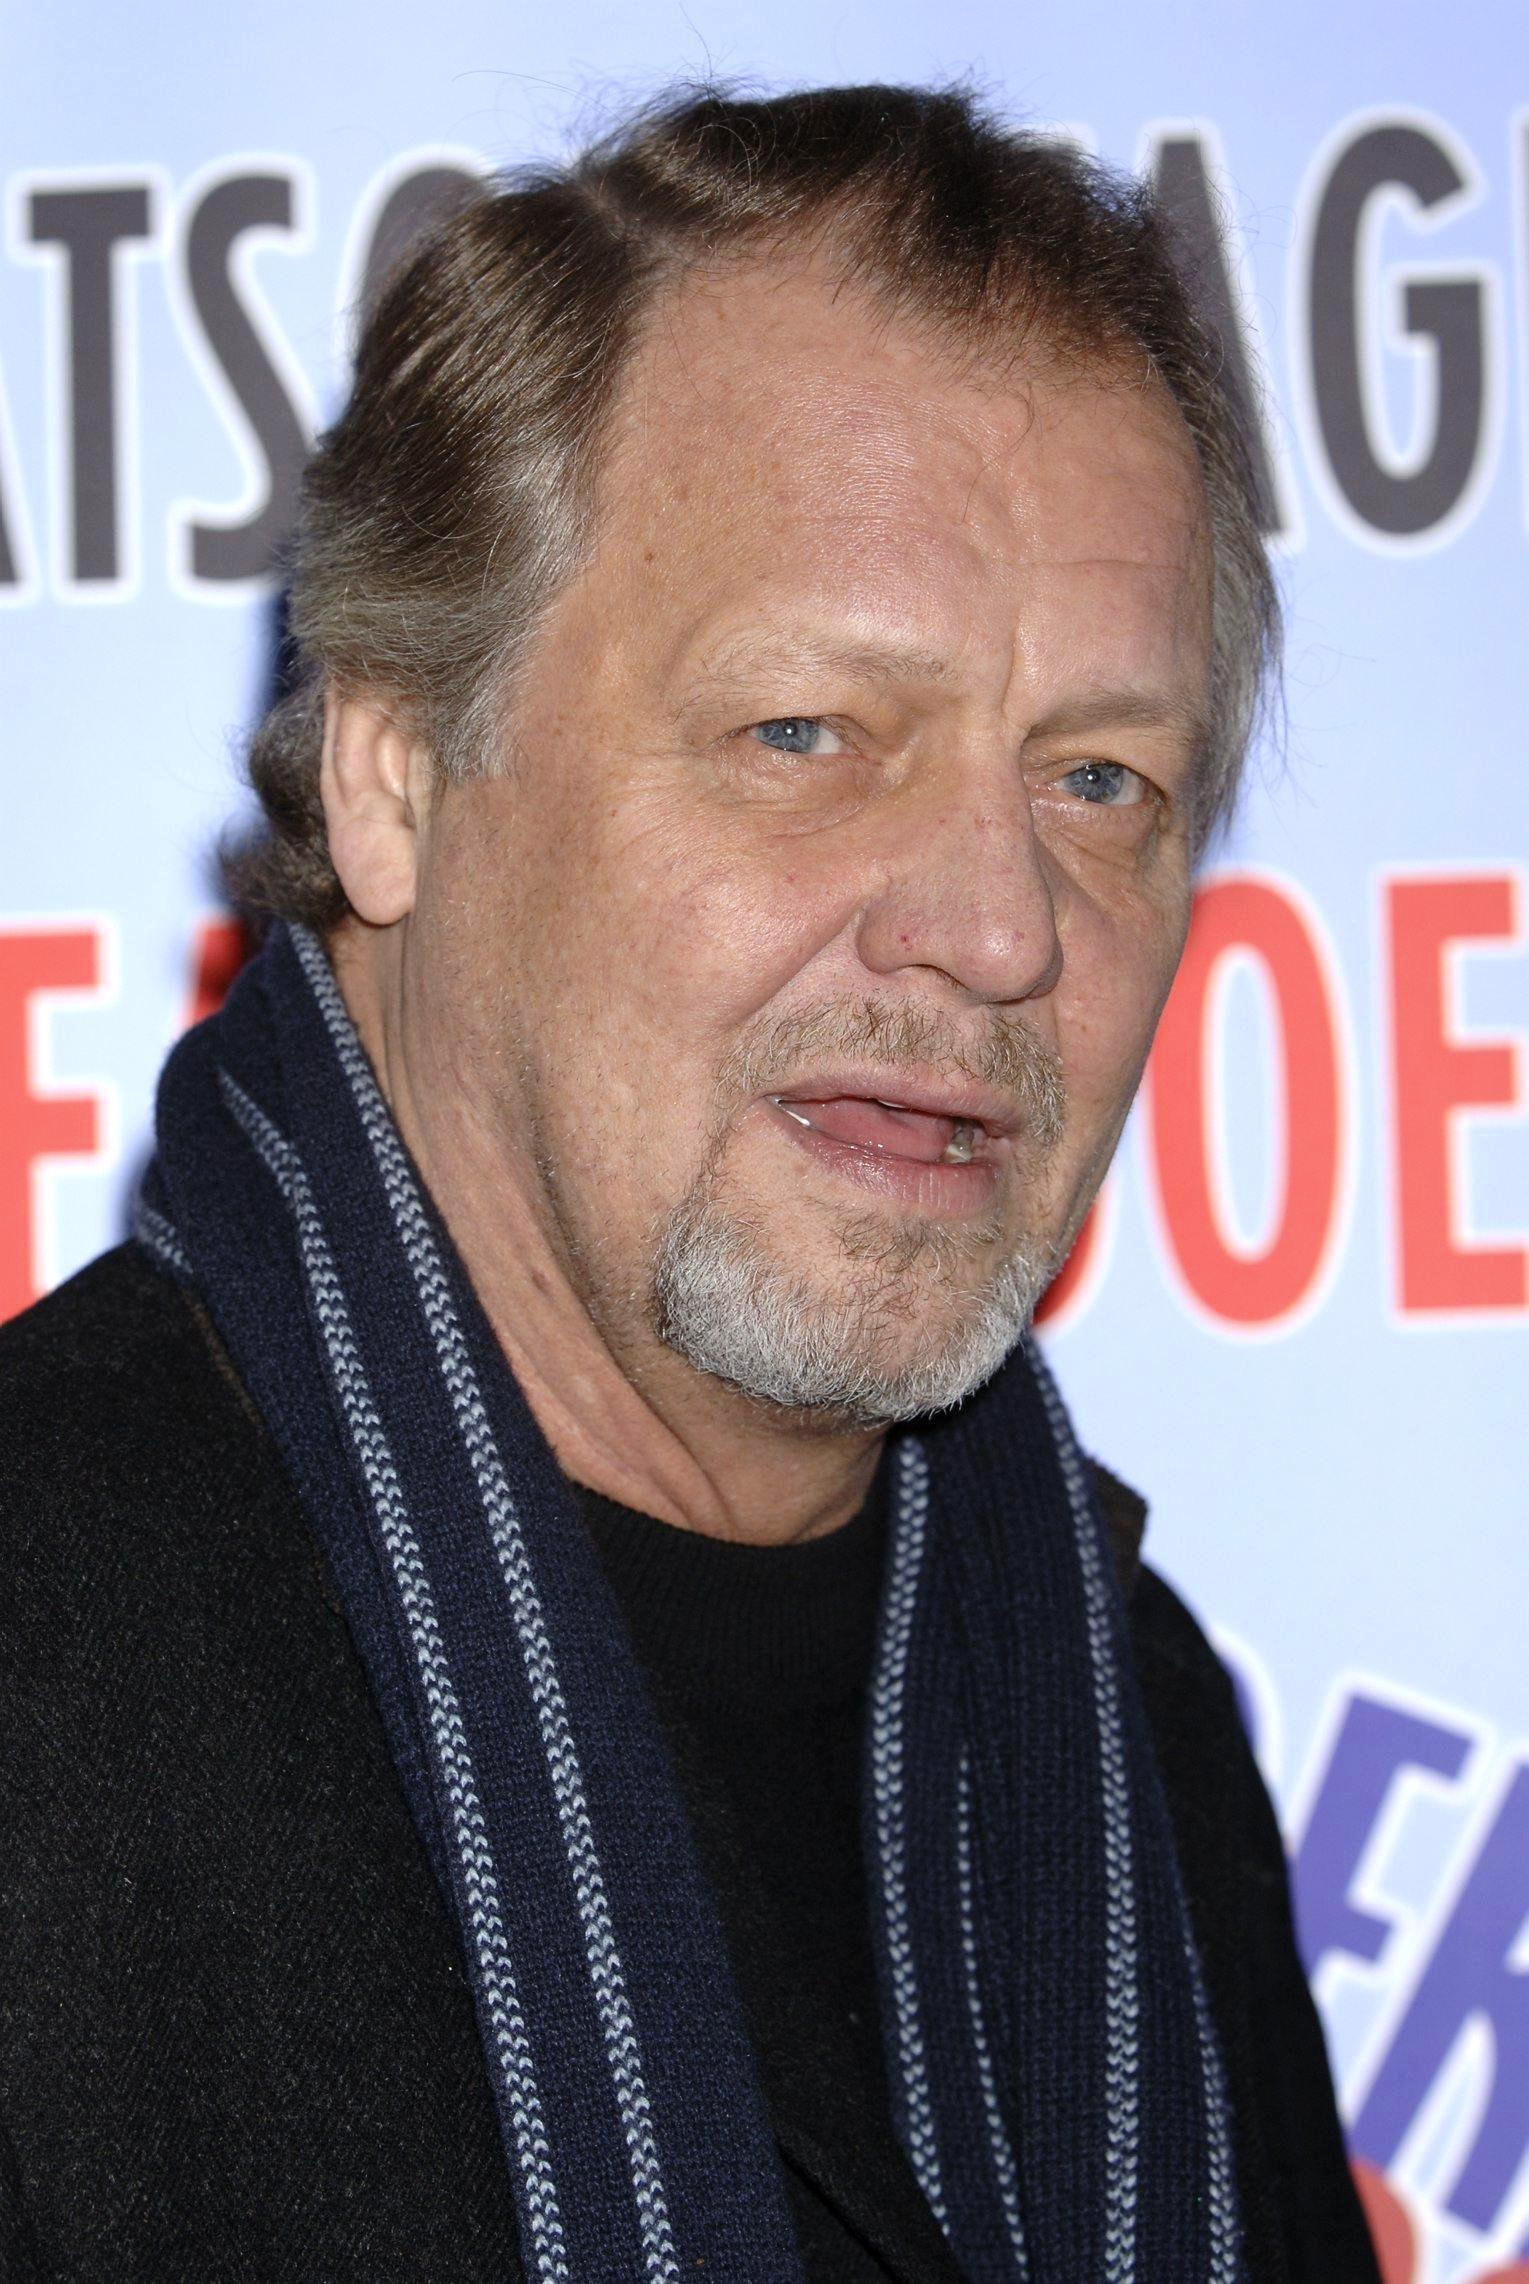 David Soul at the Theatregoers' Choice Awards in London on November 30, 2005 | Source: Getty Images